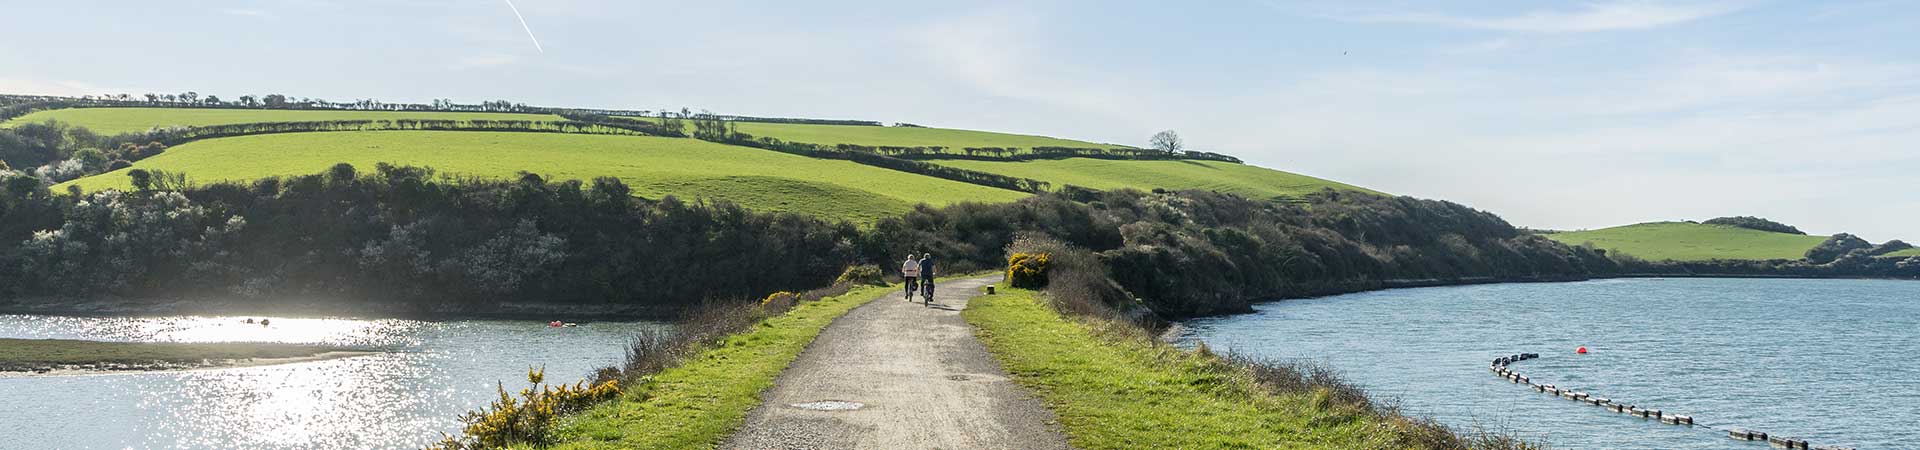 Cottages with e-bike charging points in South Devon